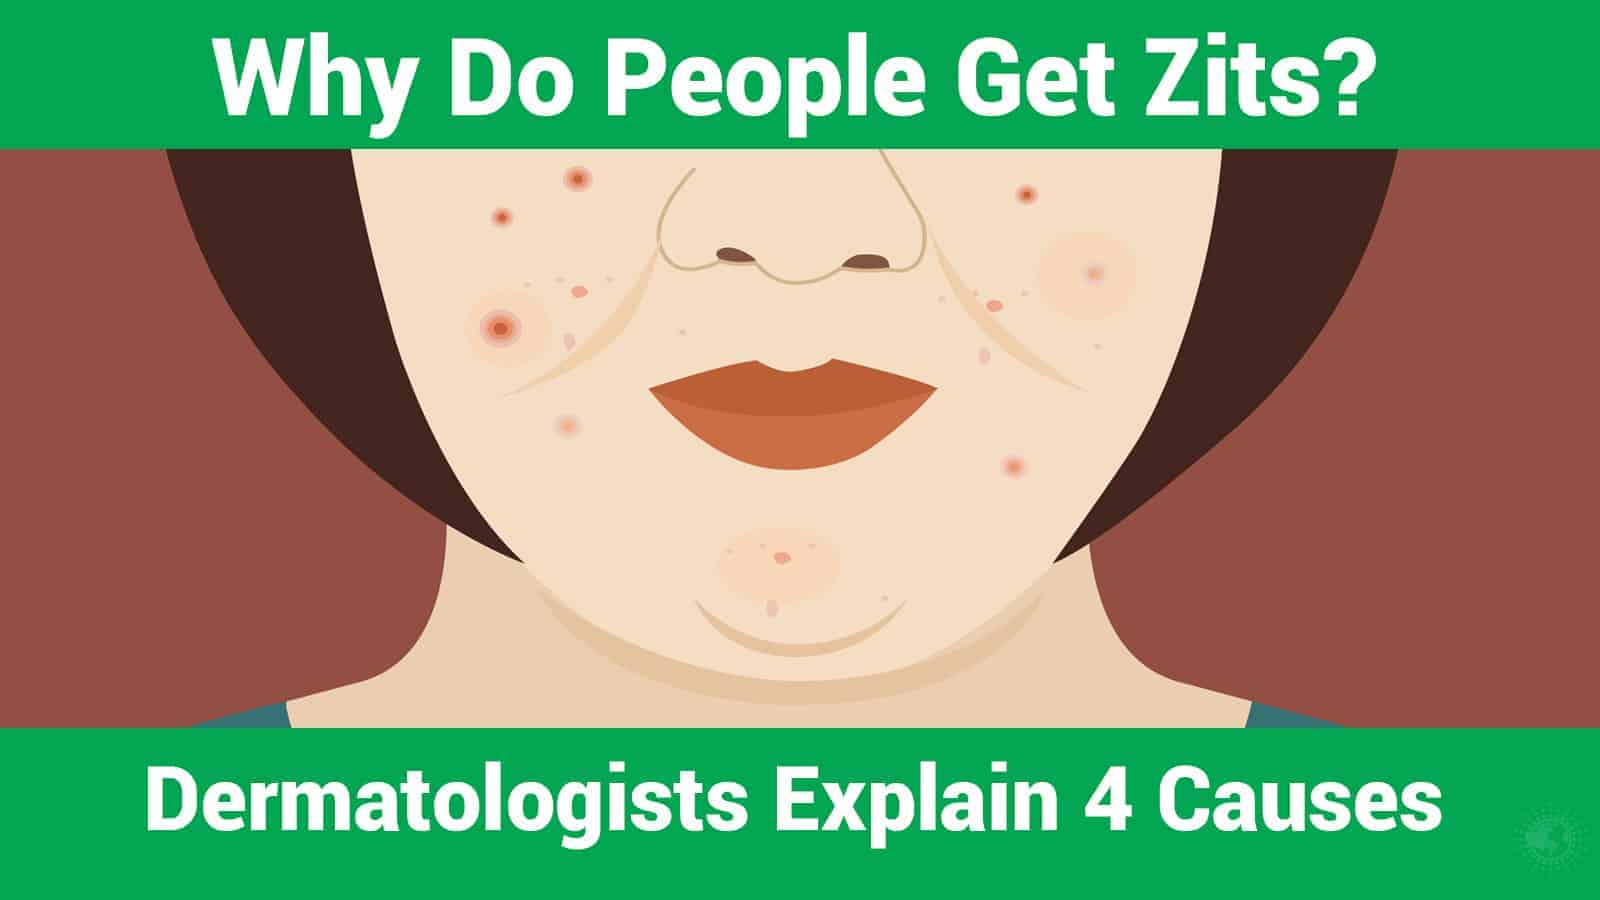 Why Do People Get Zits? Dermatologists Explain 4 Causes